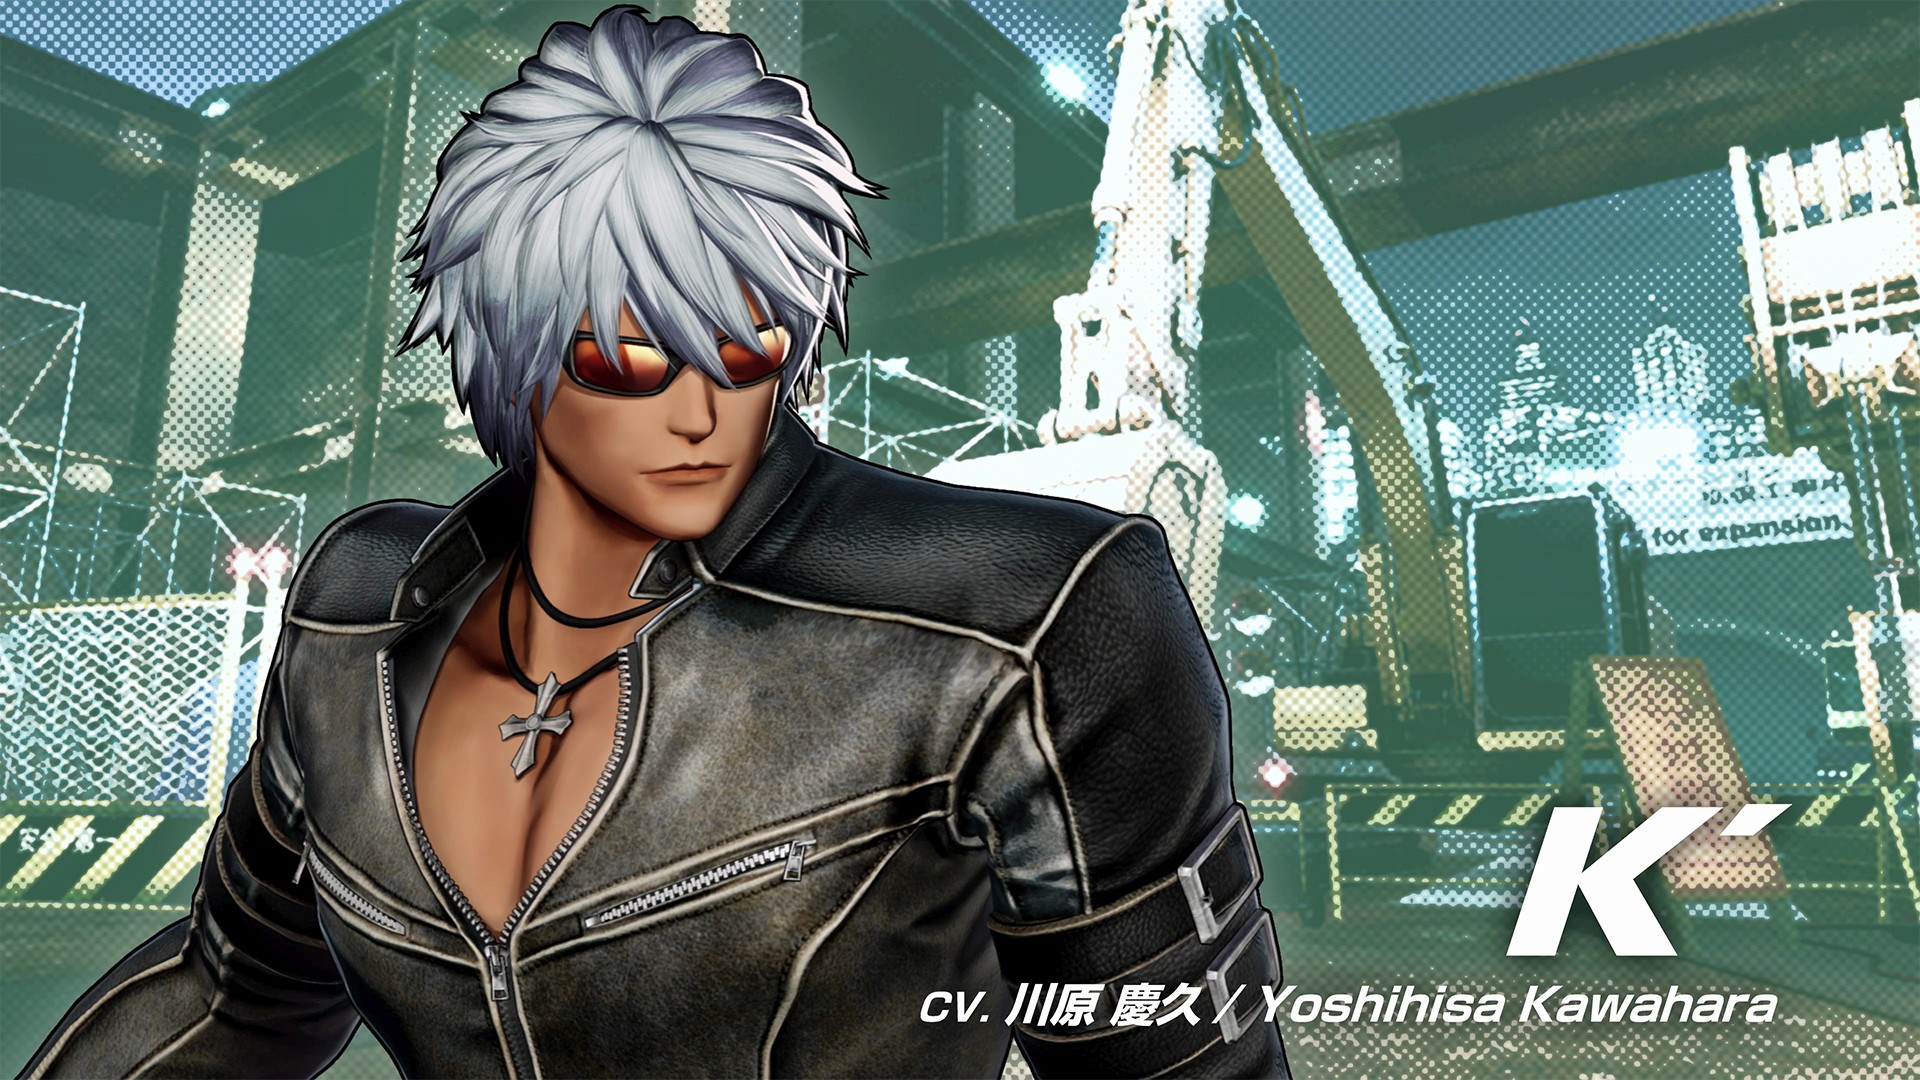 Fan-Favorite K’ Lights up the Stage in The King of Fighters XV – Xbox